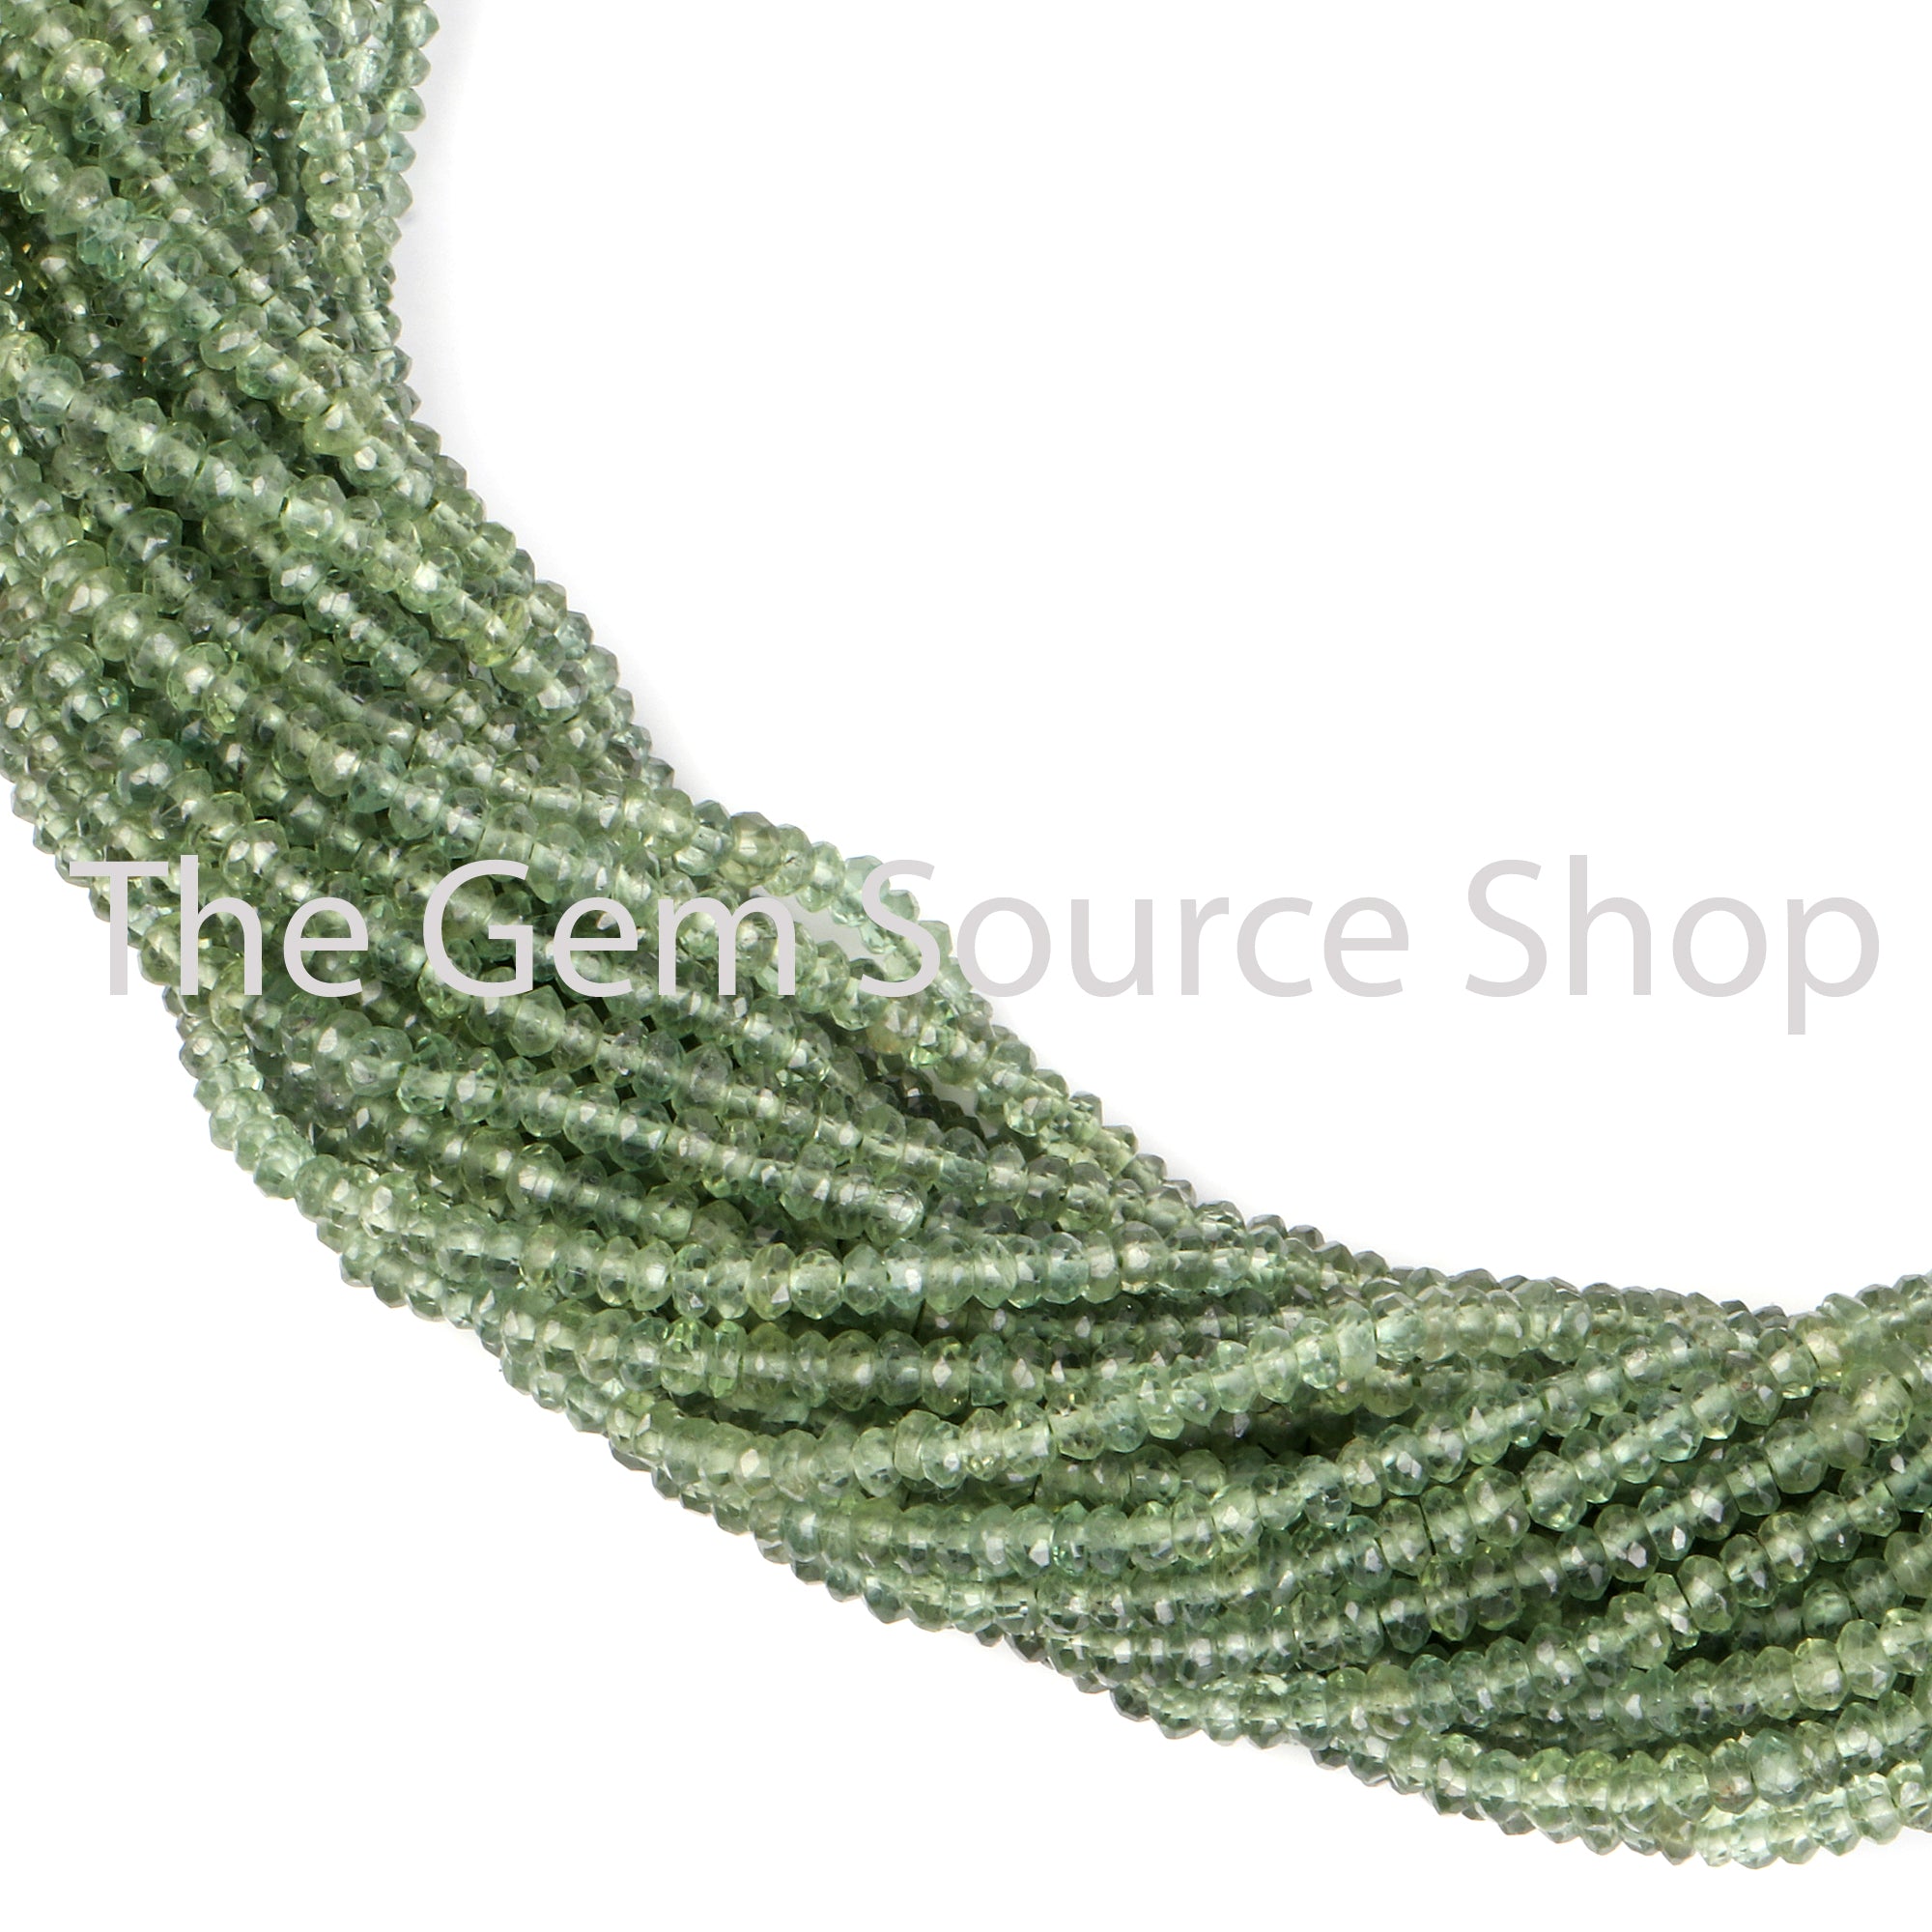 Green Apatite Beads, Green Apatite Faceted Beads, Green Apatite Rondelle Beads, Green Apatite Gemstone Beads